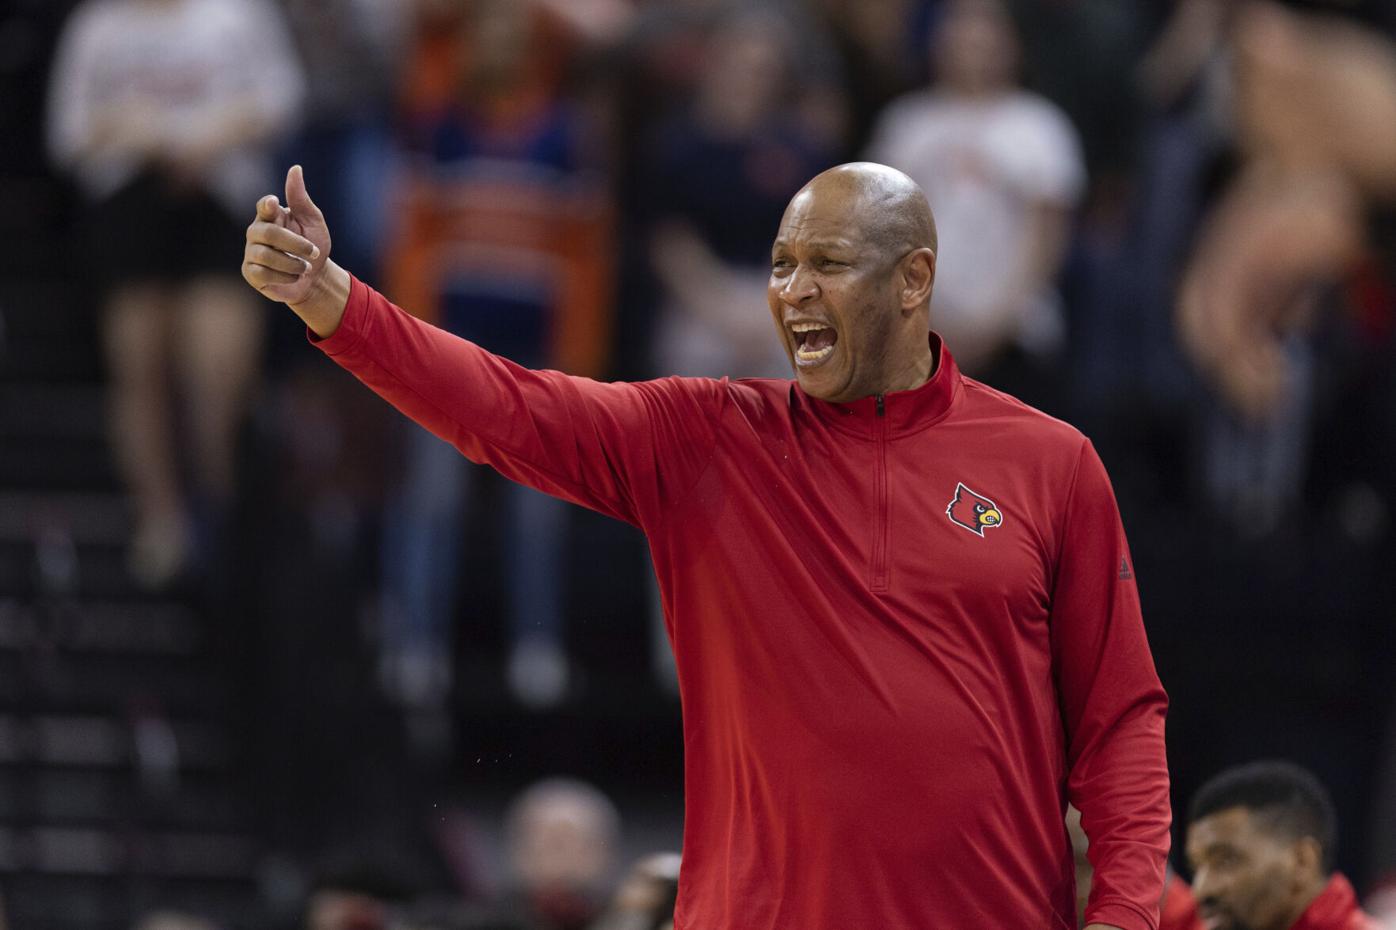 Louisville basketball: Cards coach Kenny Payne took tour of U of L